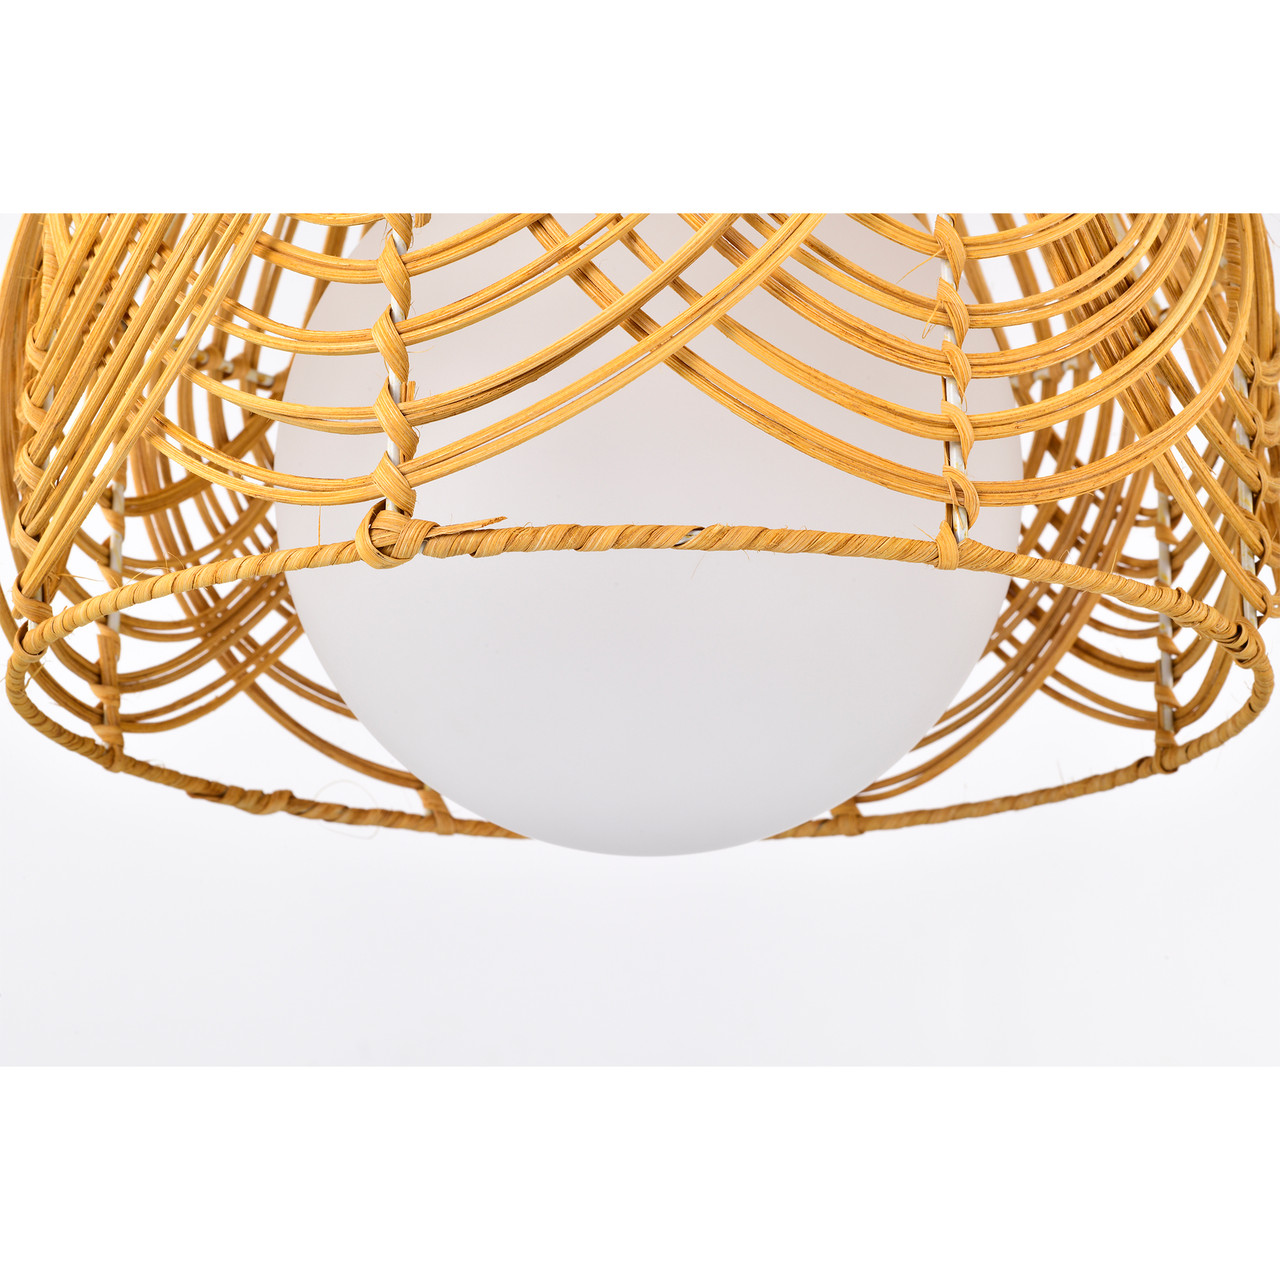 WAREHOUSE OF TIFFANY'S MD55/1B Lotta 13 in. 1-Light Indoor Brass and Woven Rattan Finish Pendant with Light Kit